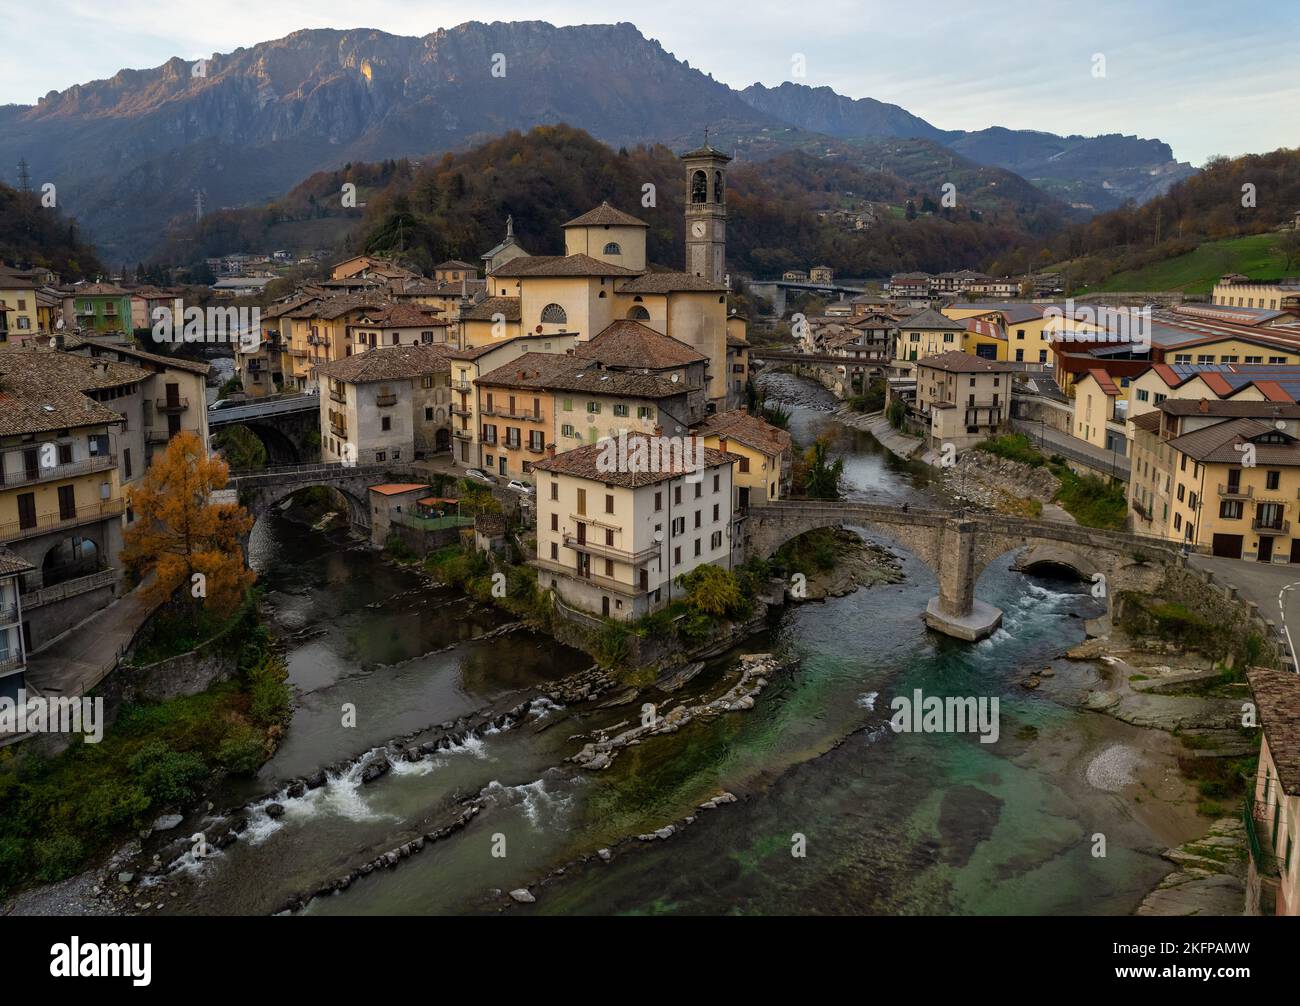 Aerial view of ancient church and crossing rivers surrounded by Alps mountains, San Giovanni Bianco Village, Valbrembana, Bergamo, Lombardy, Italy Stock Photo